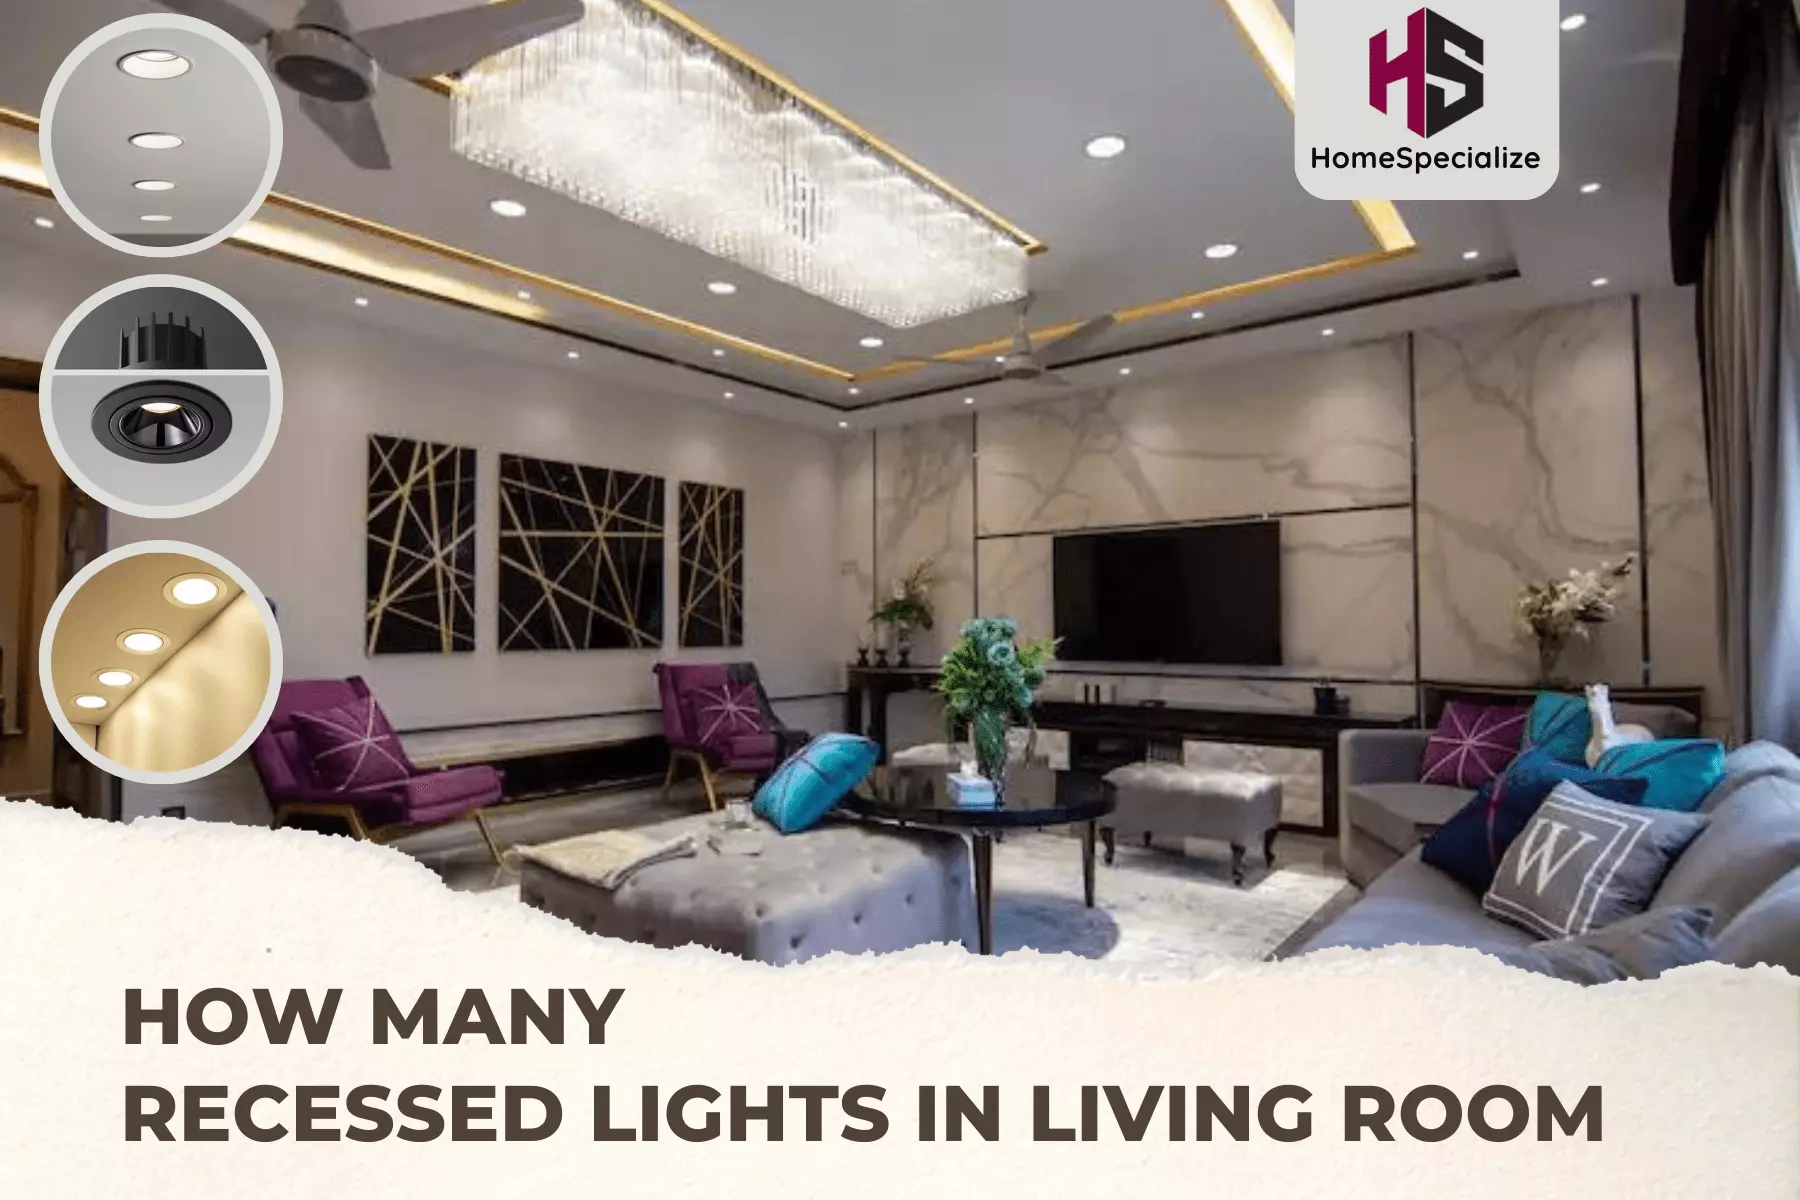 How many recessed lights in living room for a Perfect Glow?